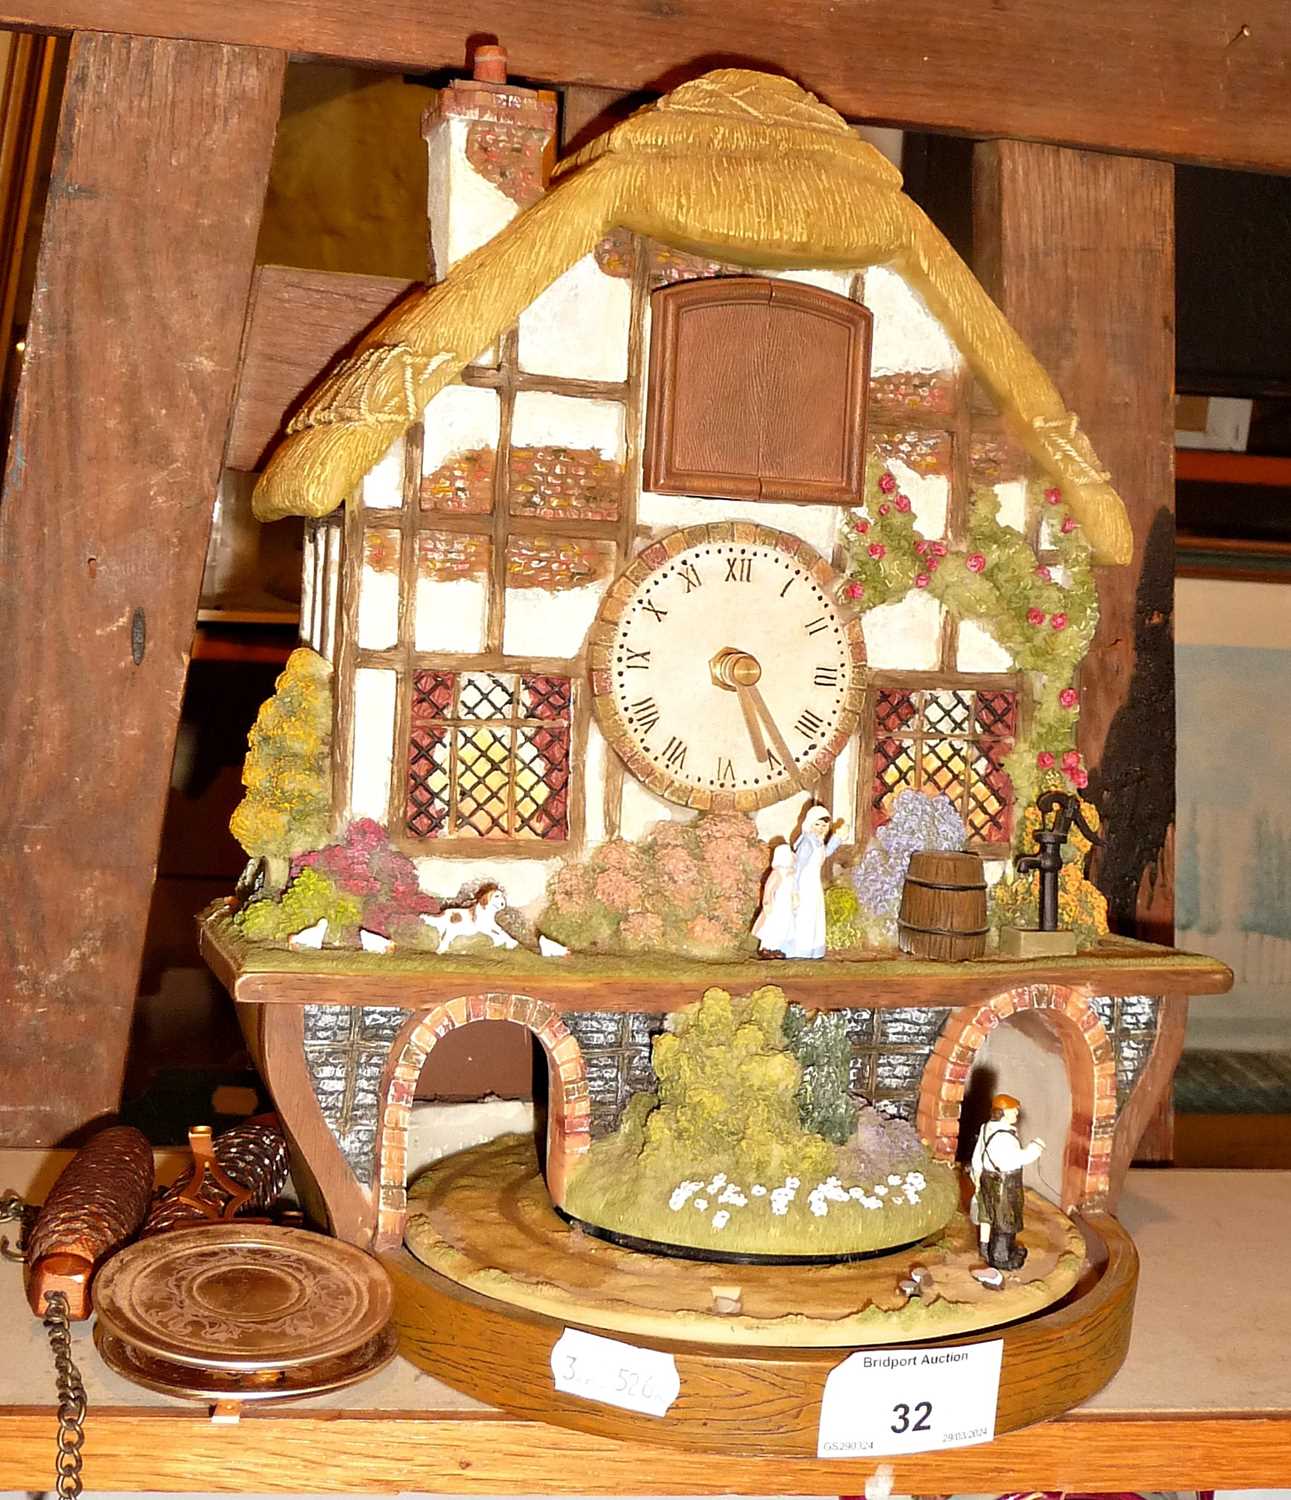 Novelty cuckoo clock "Country Days" of a Swiss farmhouse with figures (A/F) - Image 2 of 2